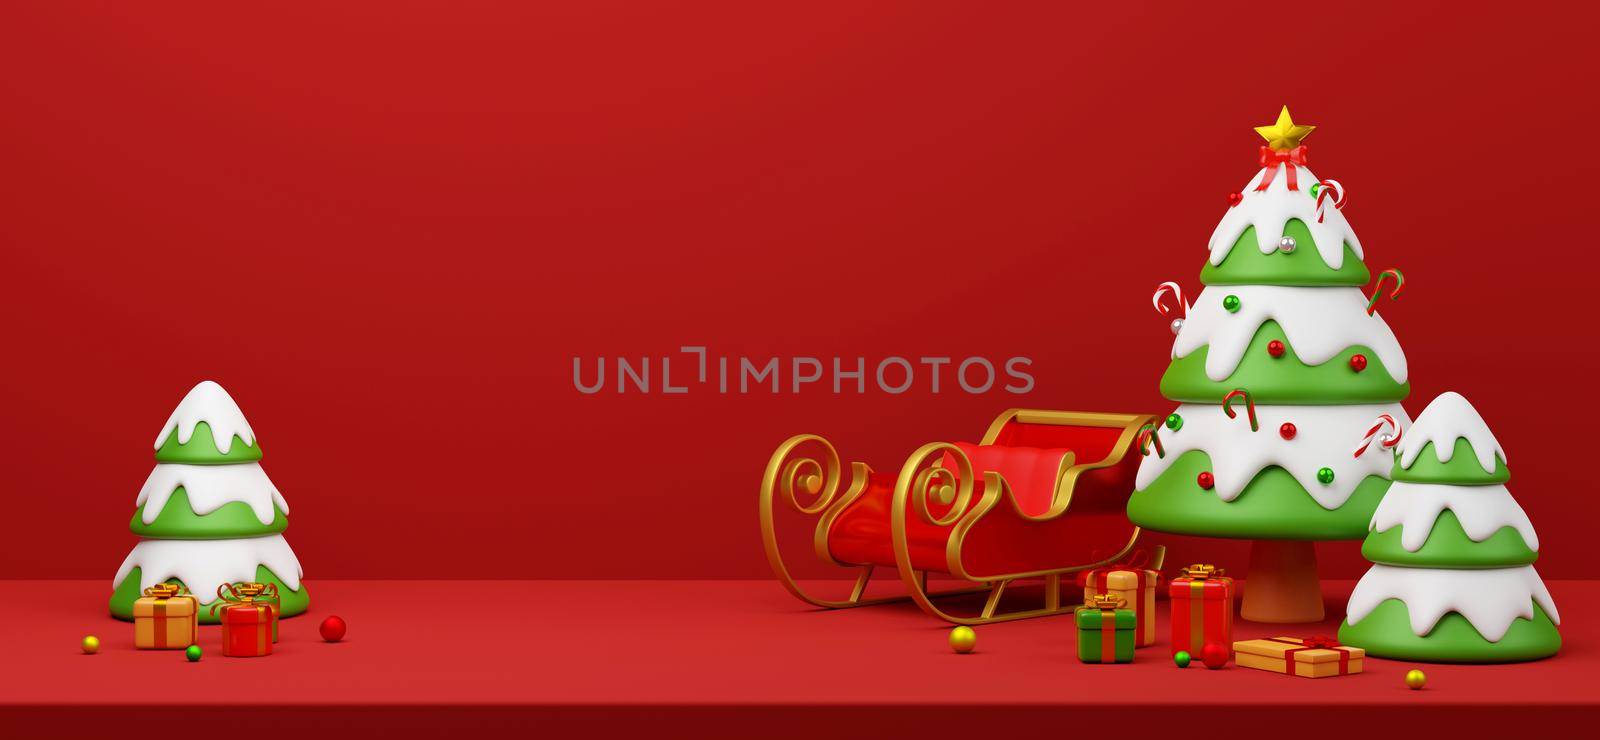 Christmas banner postcard scene of Christmas tree with sleigh and presents, 3d illustration